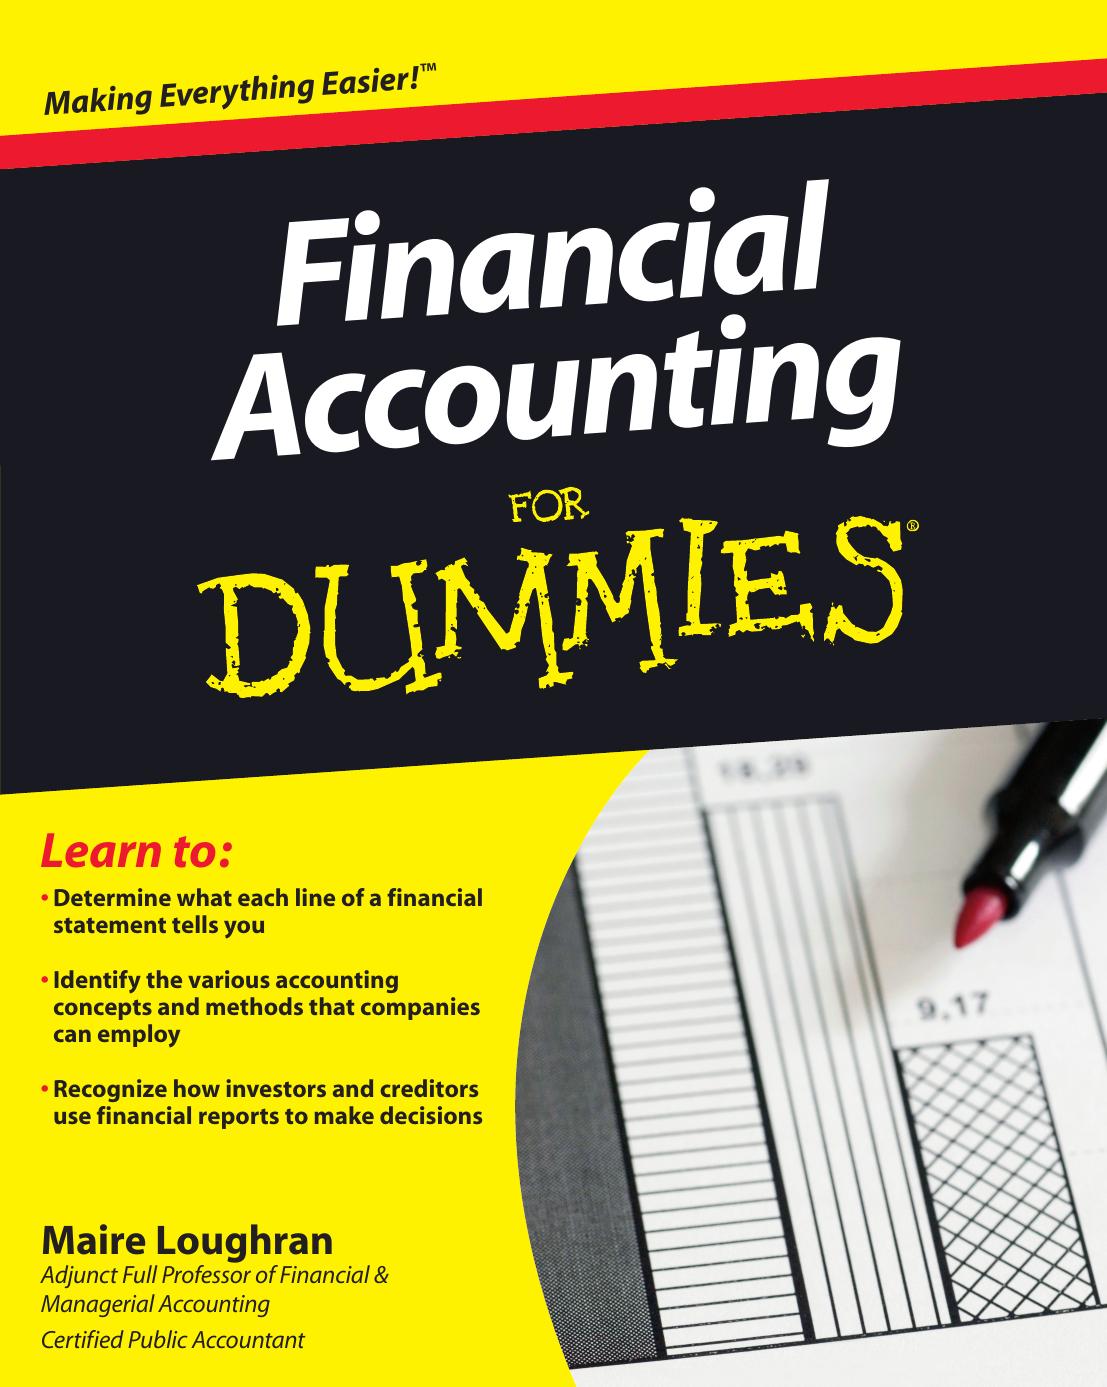 Financial Accounting For Dummies